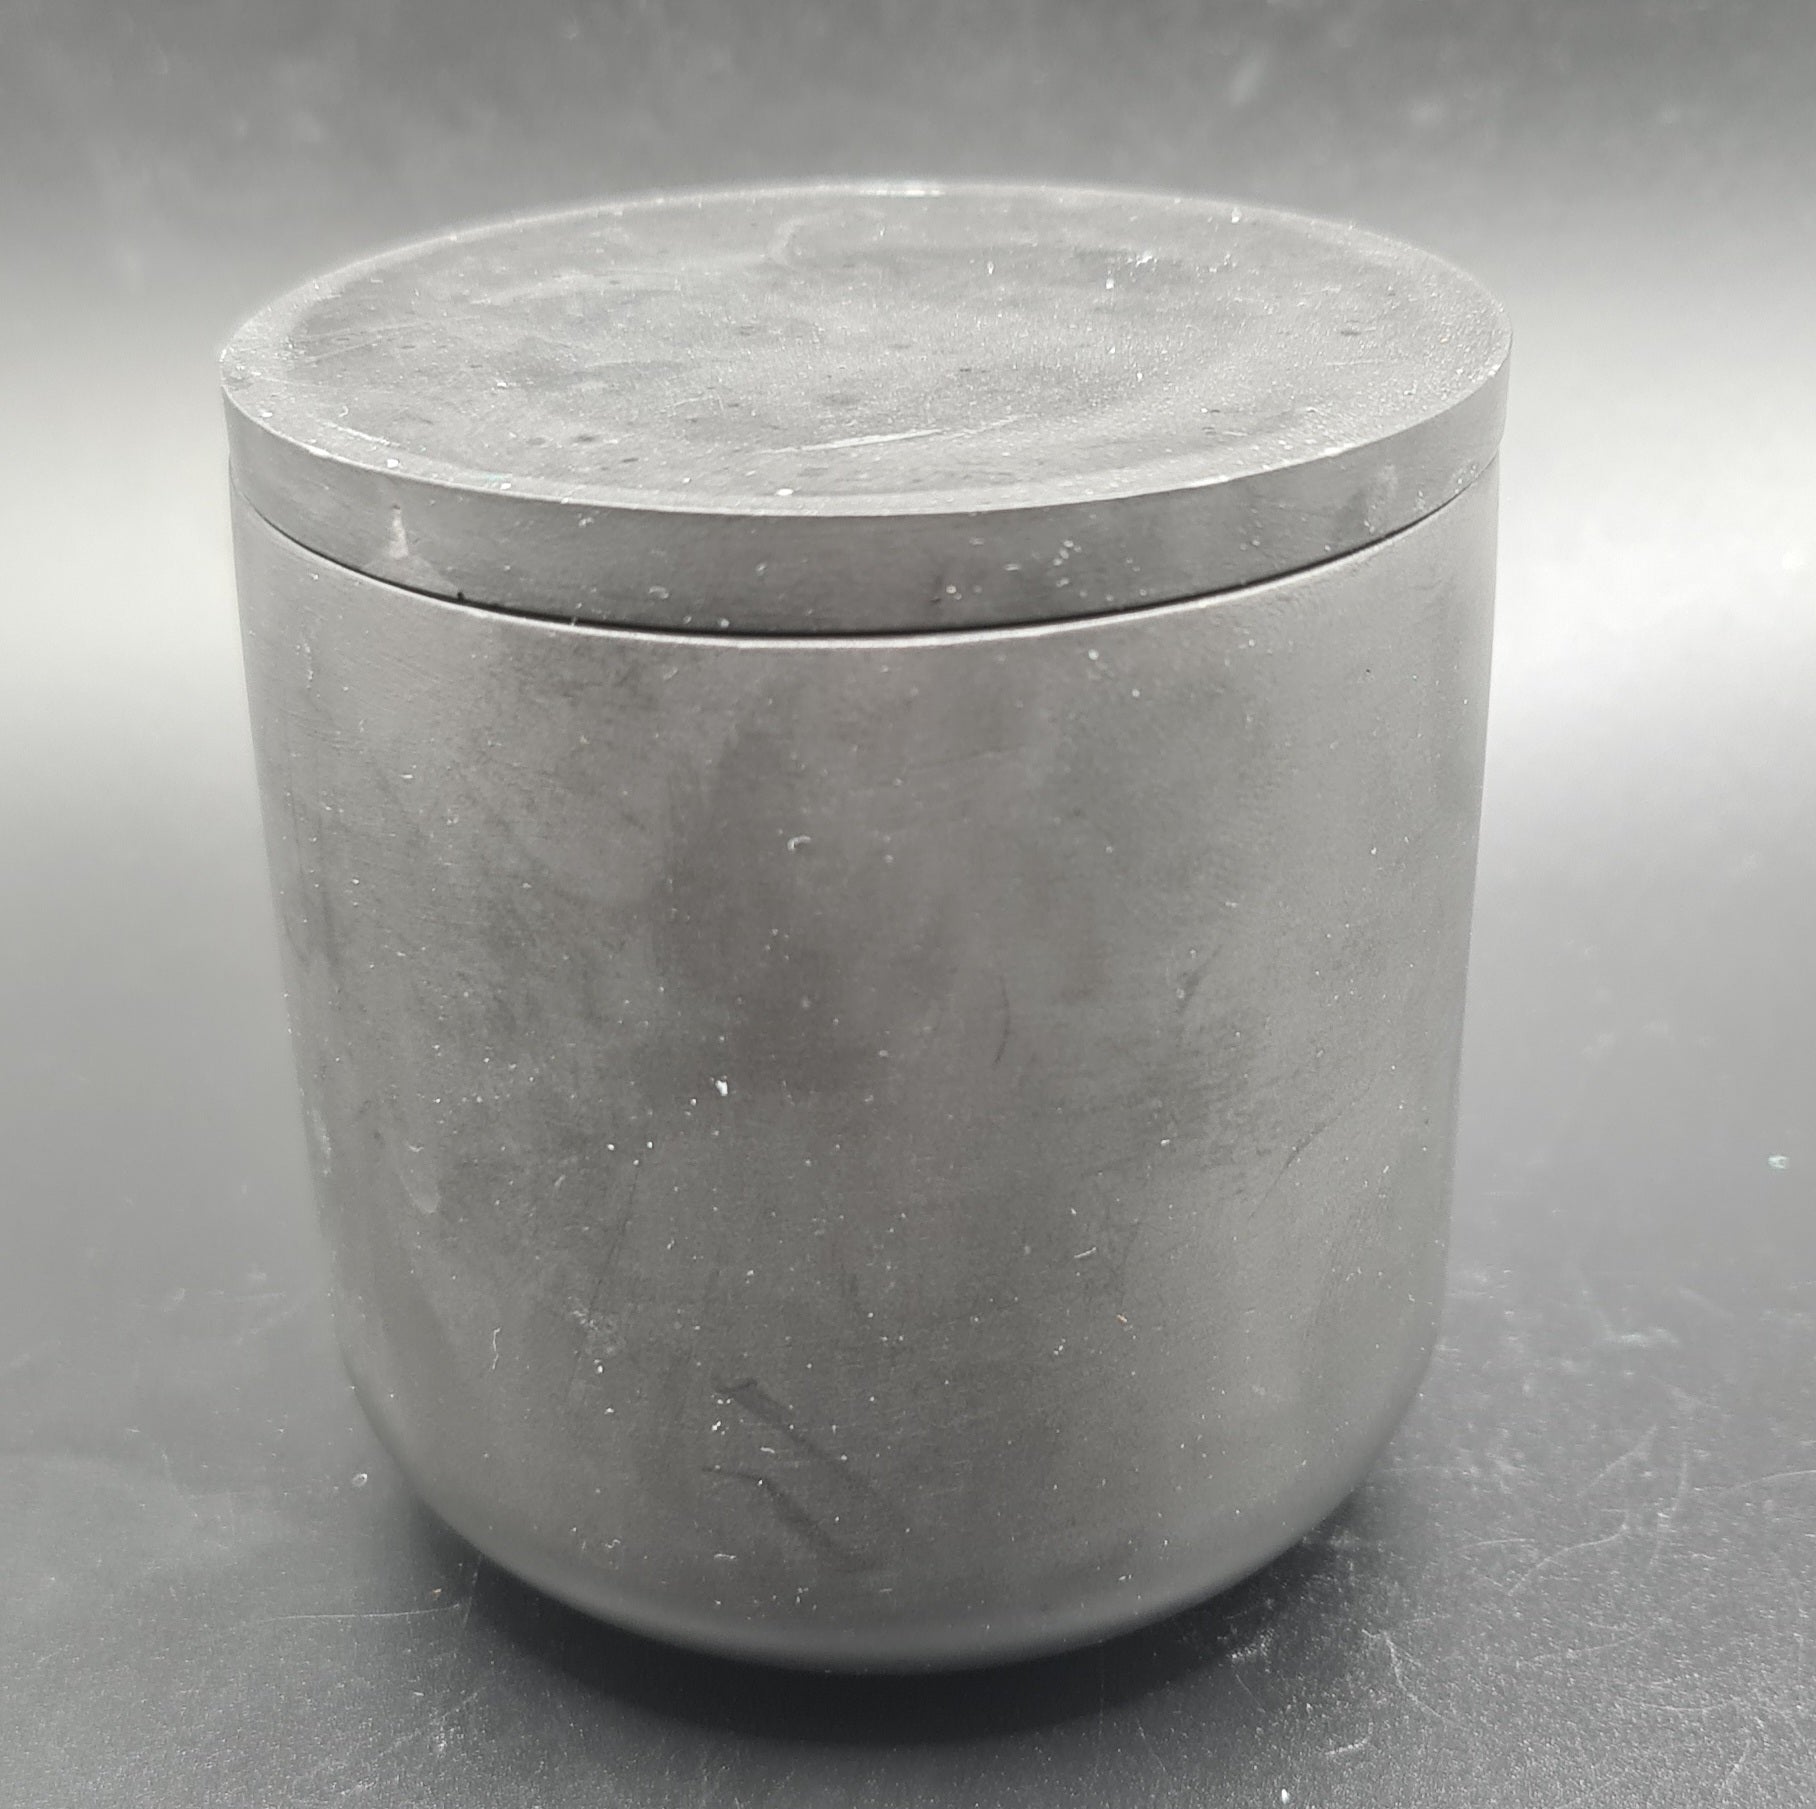 Handcrafted simple-pot candle, offering a clean and classic design.